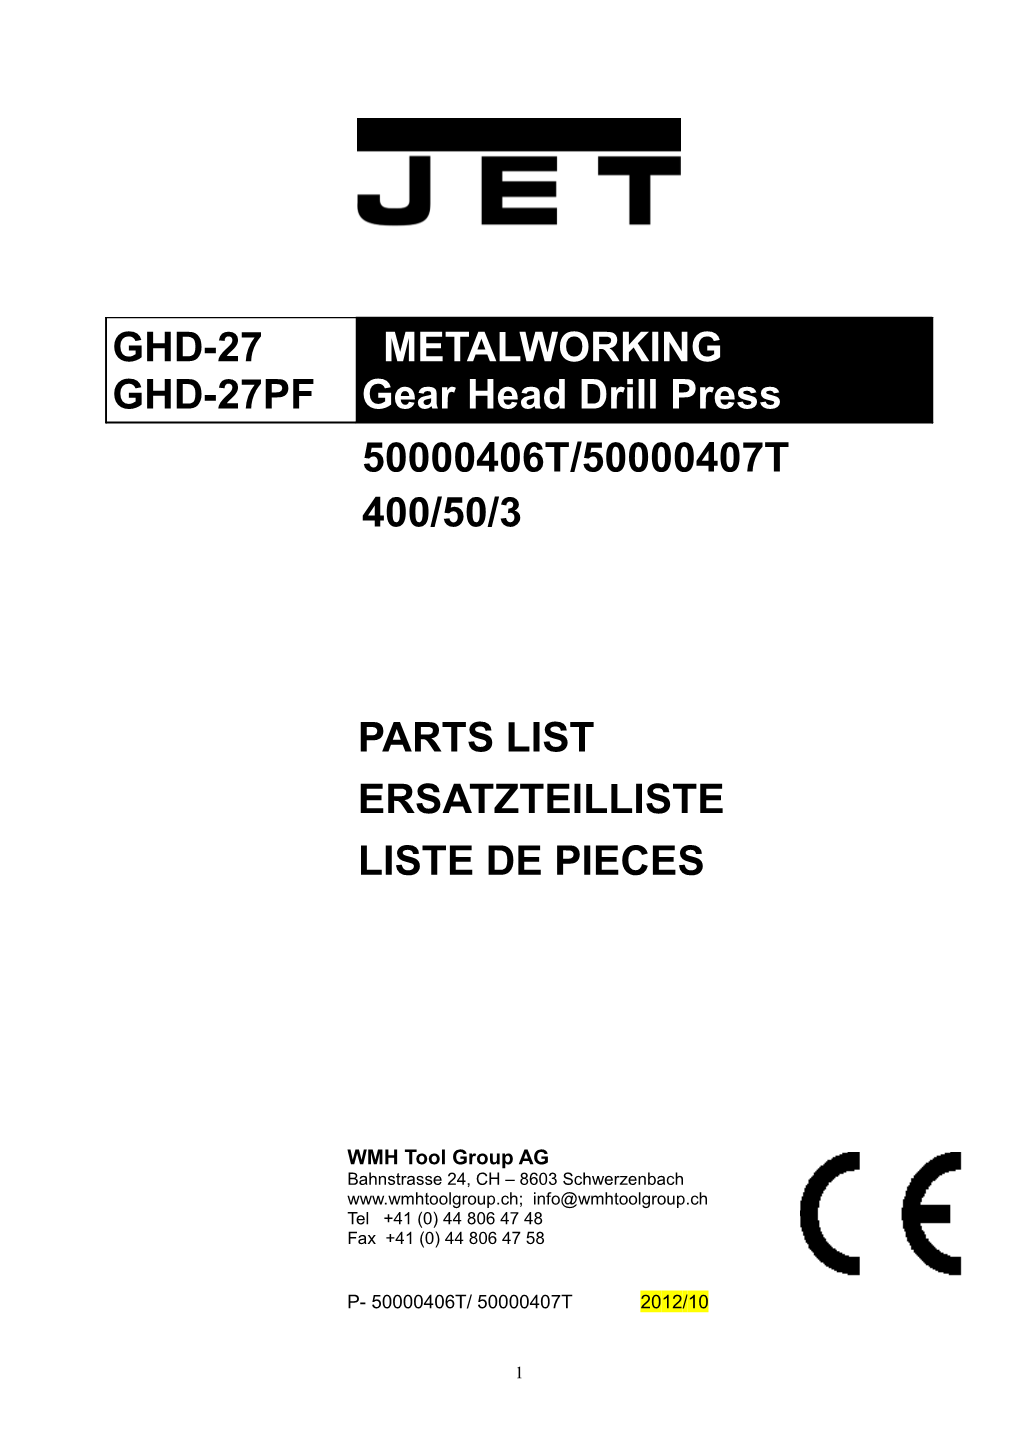 Parts List for the GHD-27